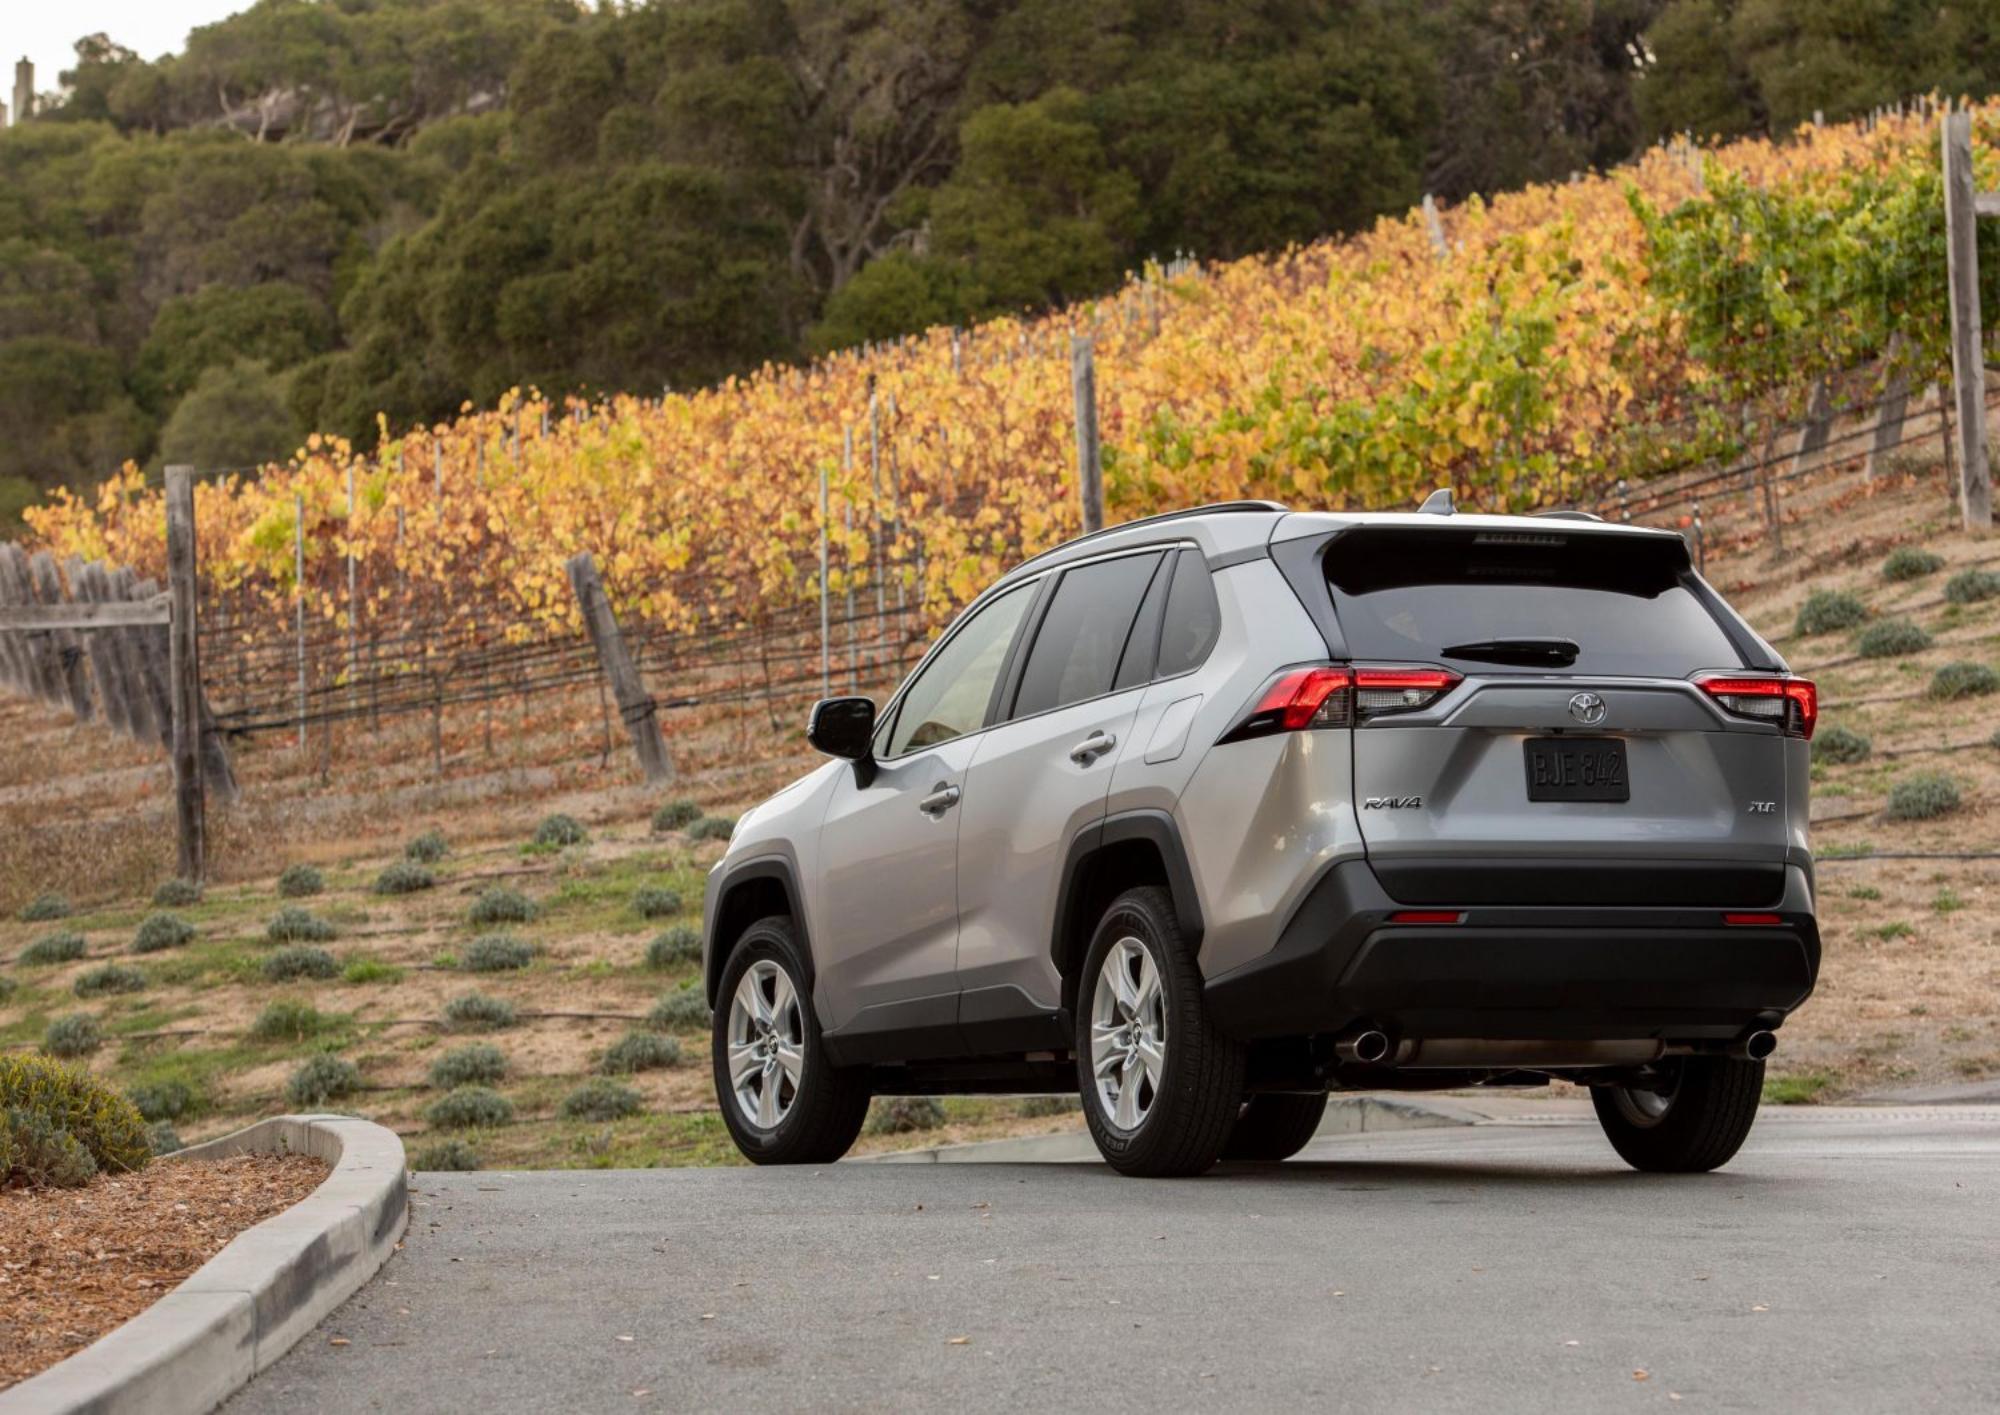 The 2021 Toyota RAV4 offers great features and a spacious interior for a decent price.